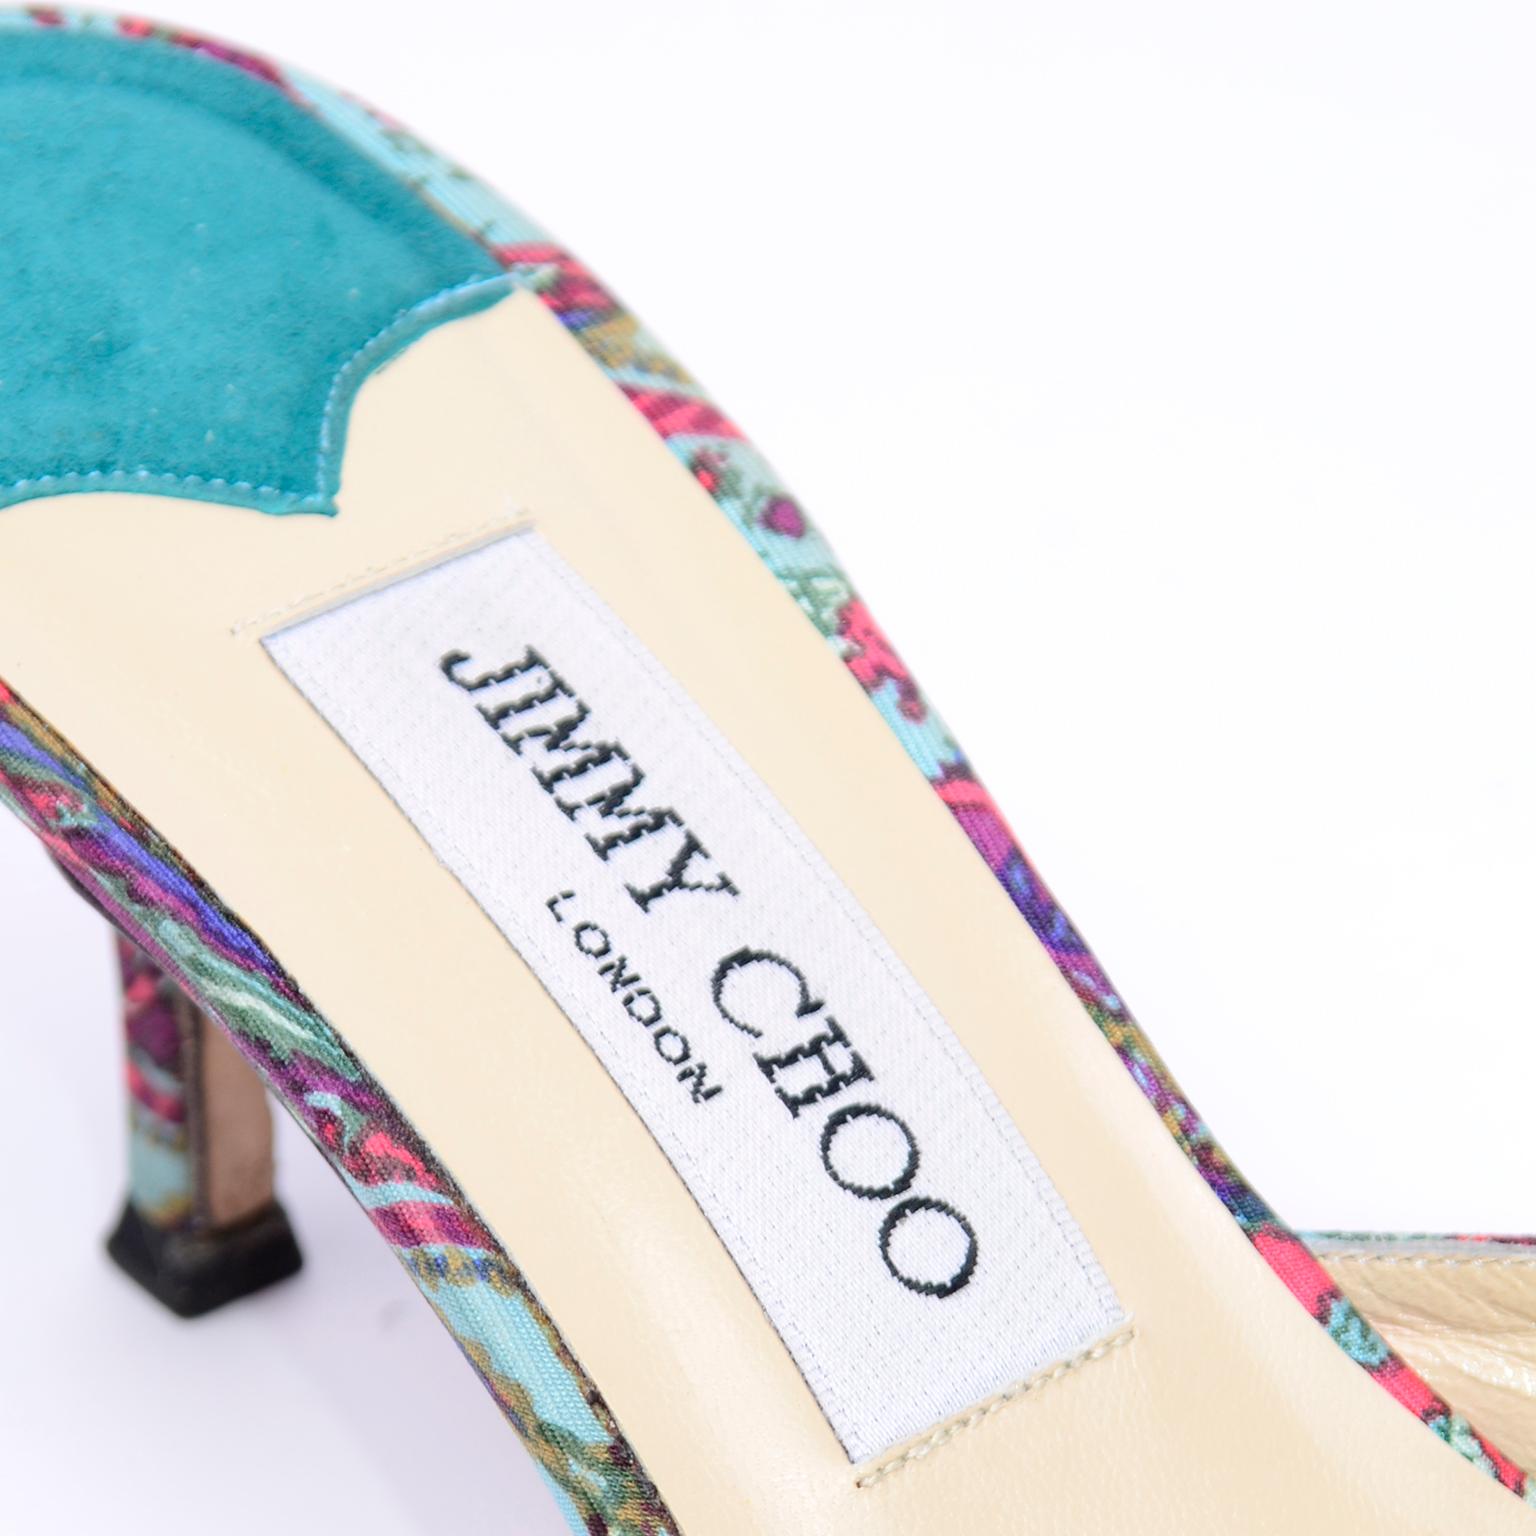 Jimmy Choo London Colorful Mules Shoes in Turquoise Print W Heels & Gold Beads 2